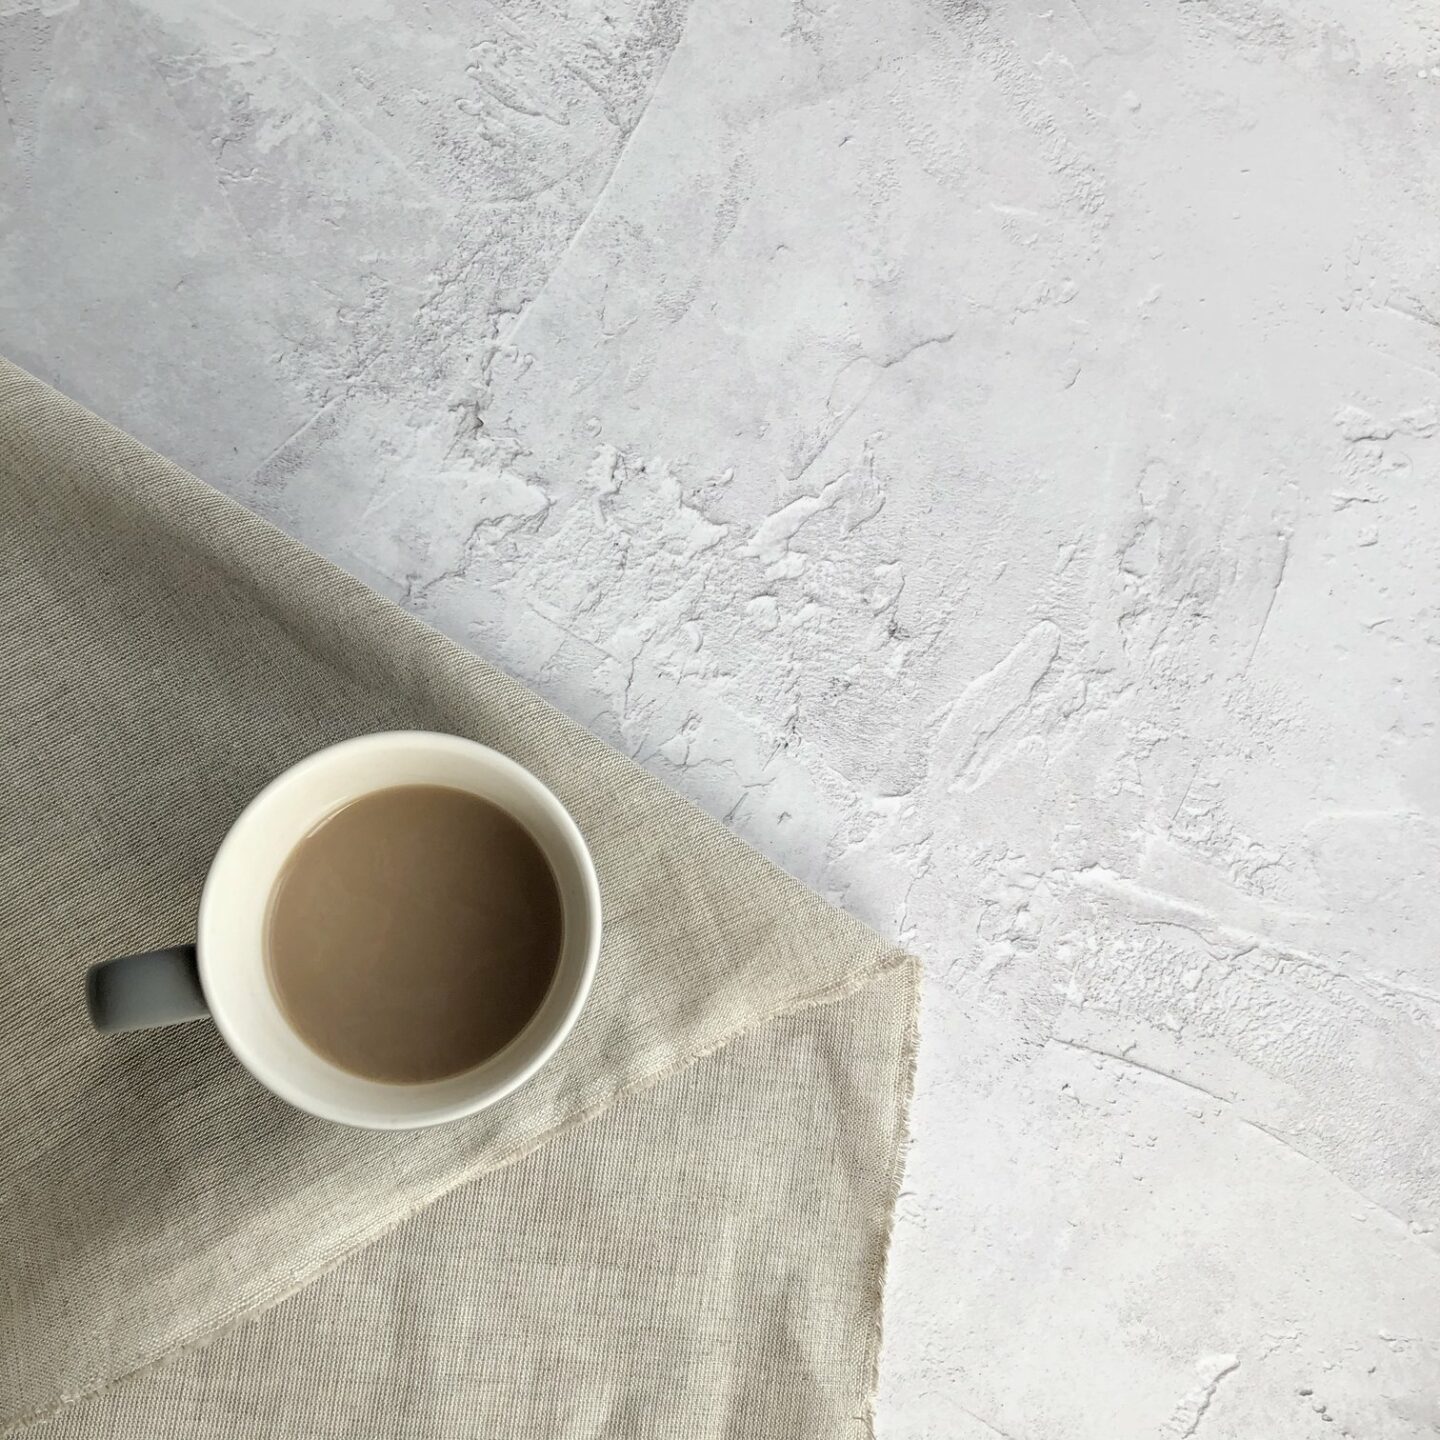 Cup of tea on fabric on a grey background